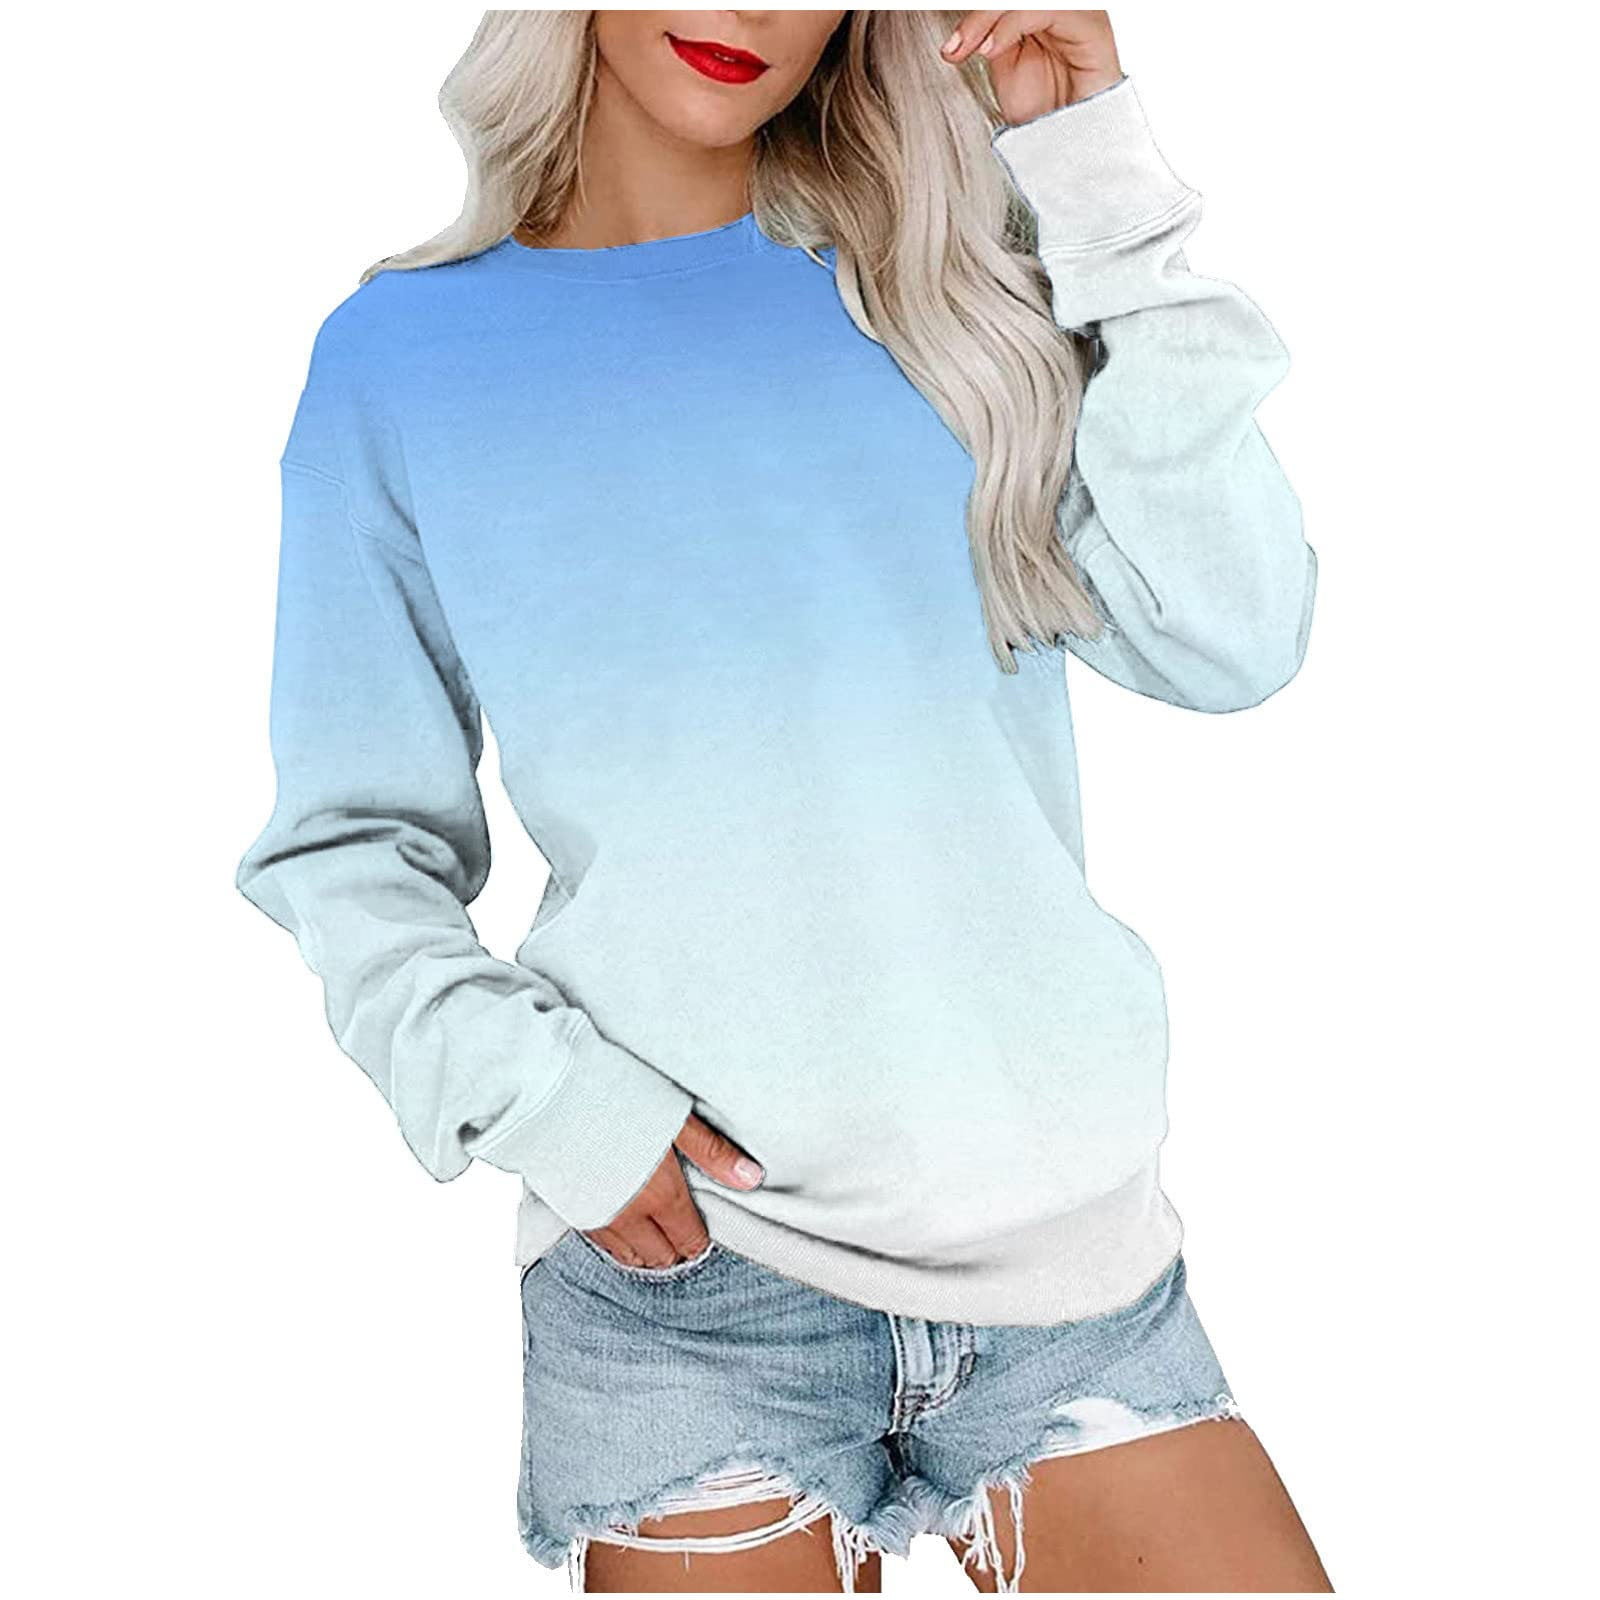 Cymmpu Girls' Happy 223 Tops New Year's Day Holiday Tops Casual Sweatshirts Trendy Blouses Ladies Crewneck Clothing Long Sleeve Shirts Women's Novelty